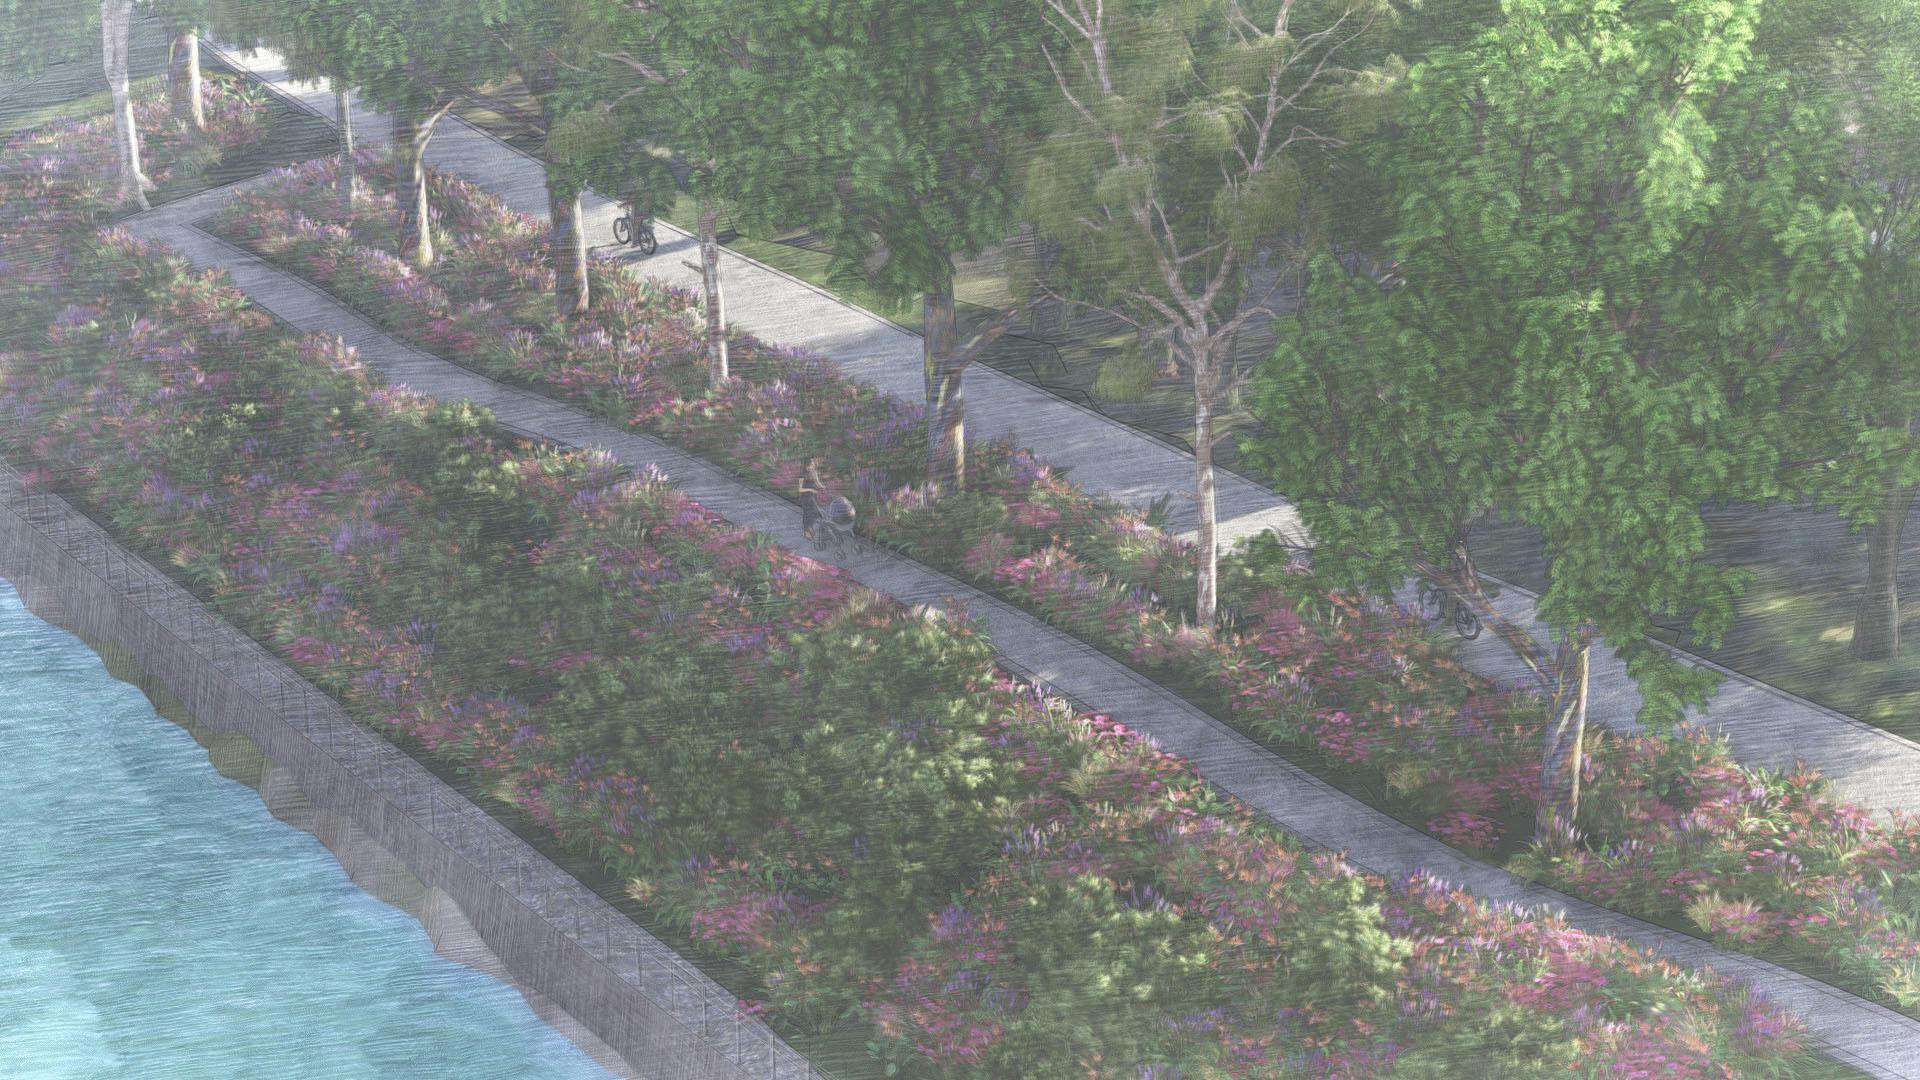 Artist's impression of plantings and paths along the river's edge